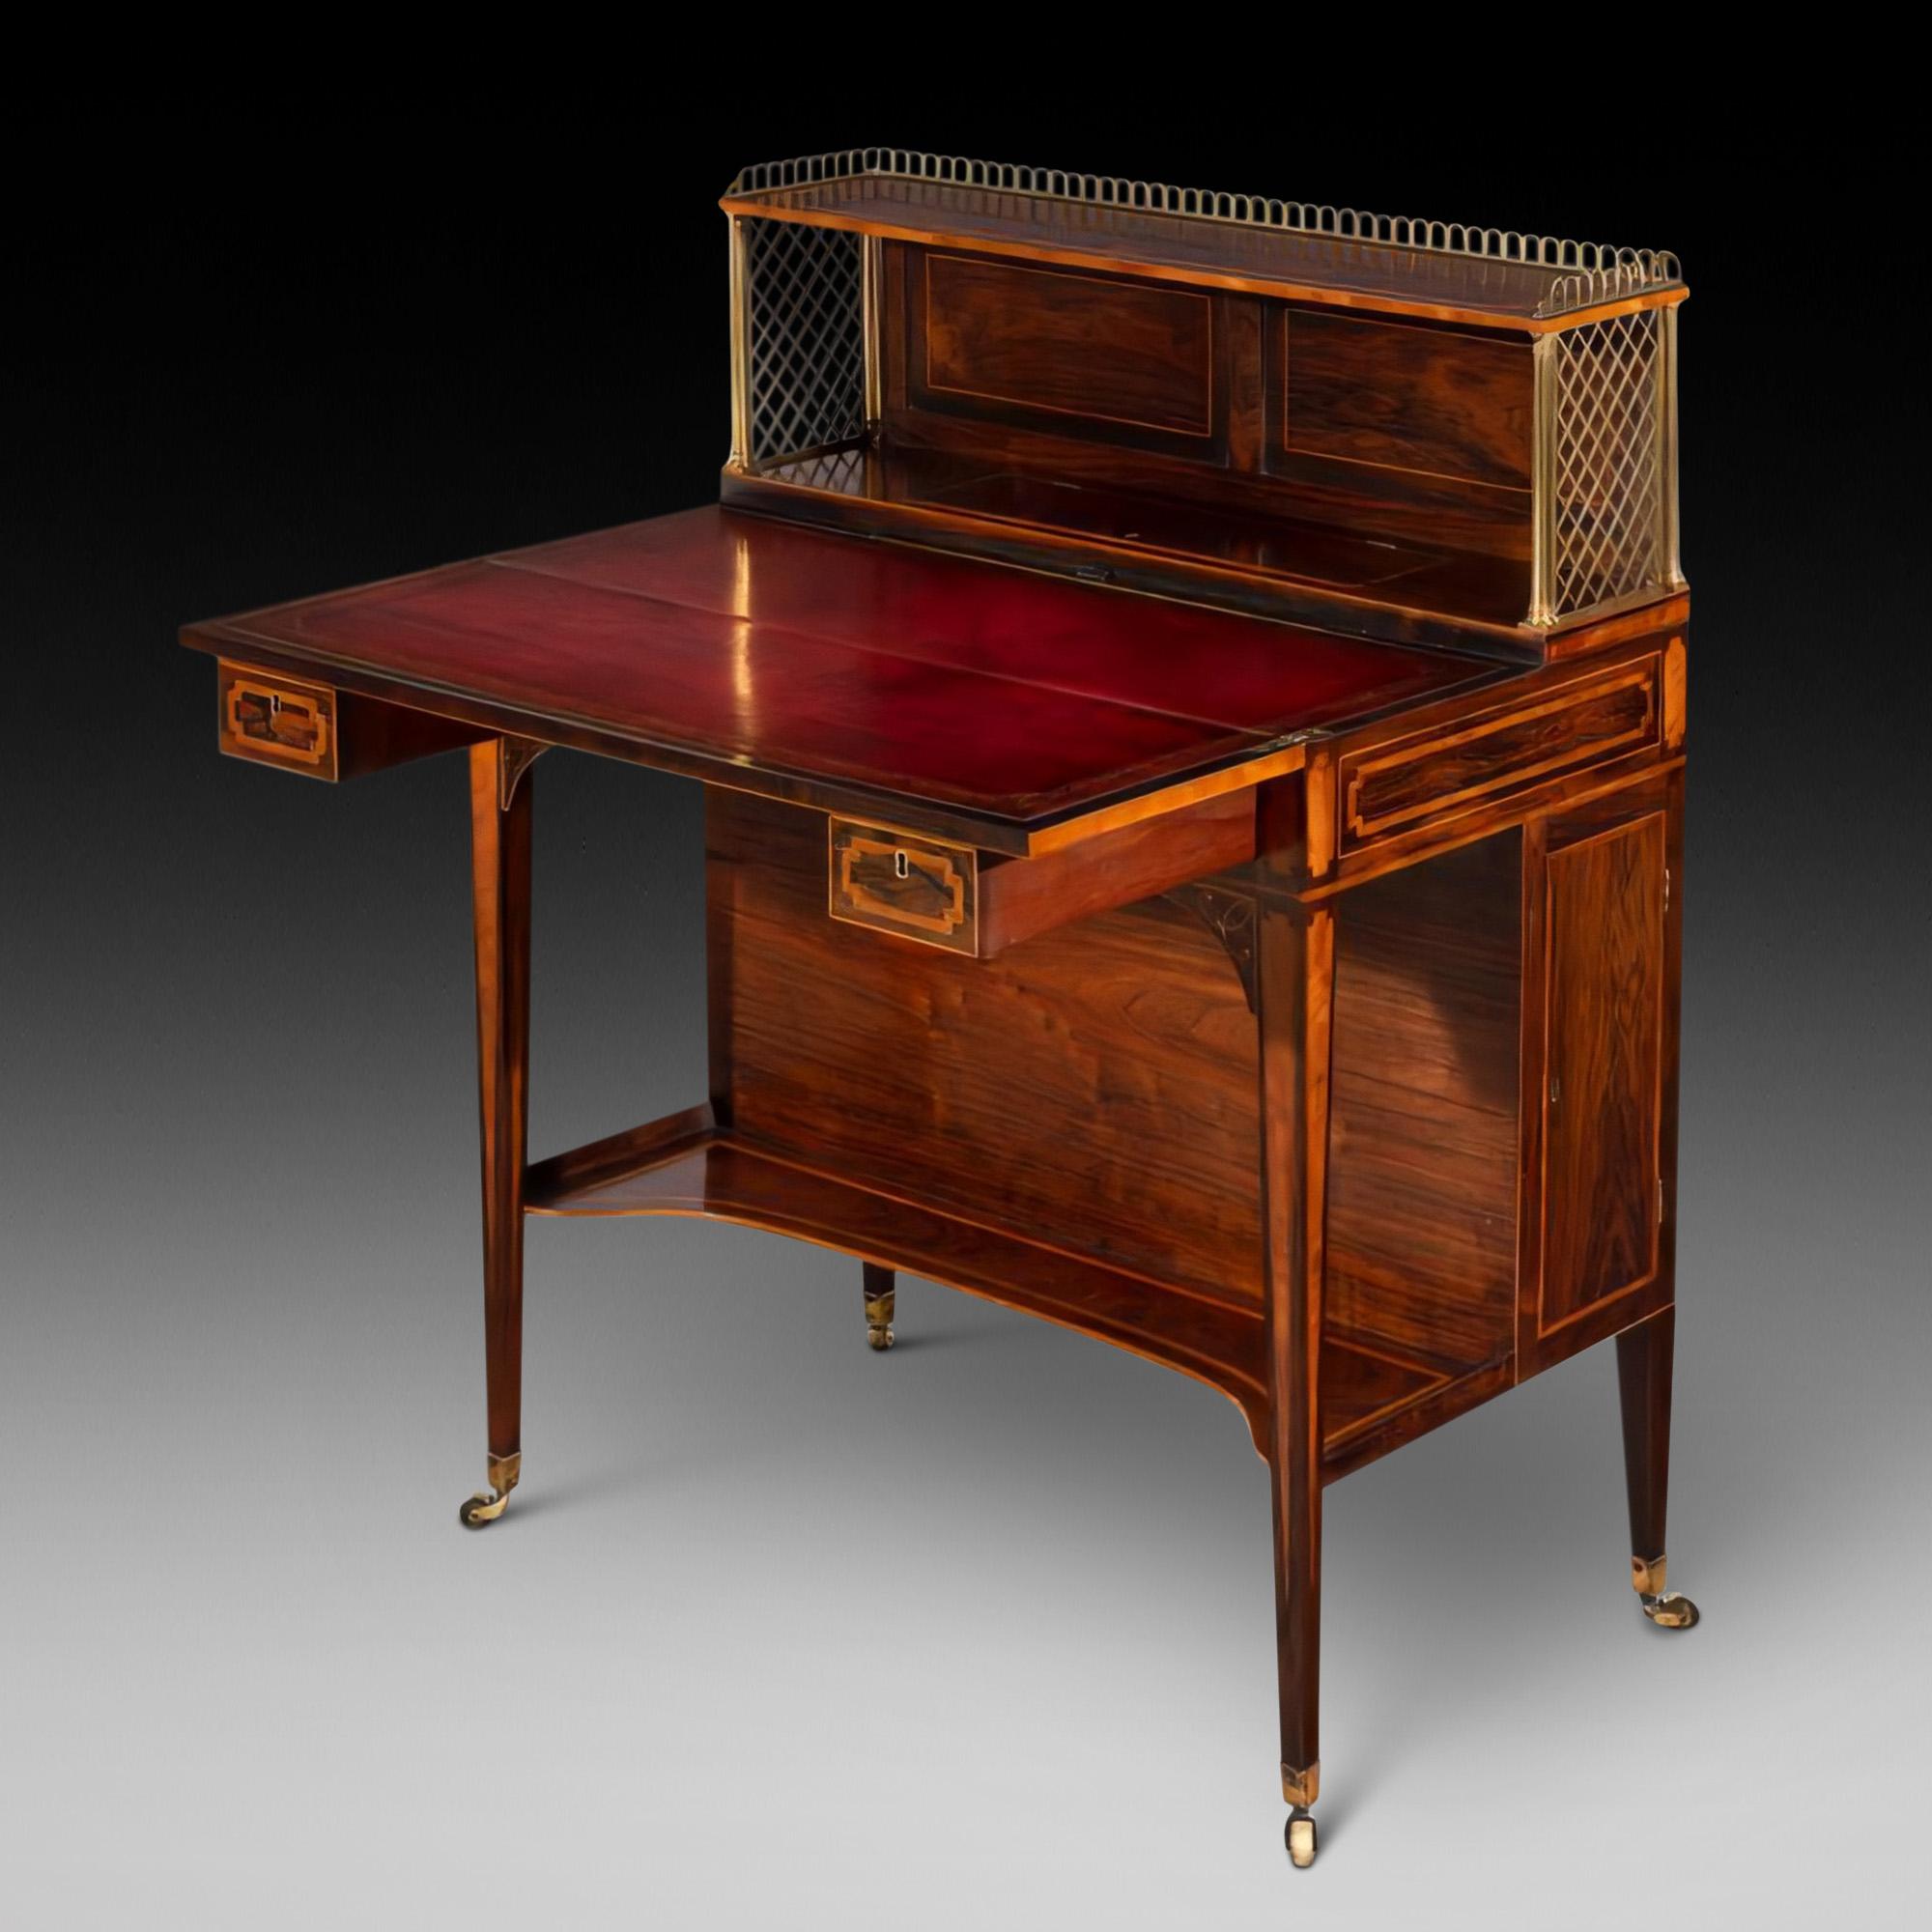 Late 18th century rosewood artists desk of Sheraton design with fold down table with inset easel, and well with lift up lid fitted for paint pots, fitted drawers with artists materials and a folio cabinet 30